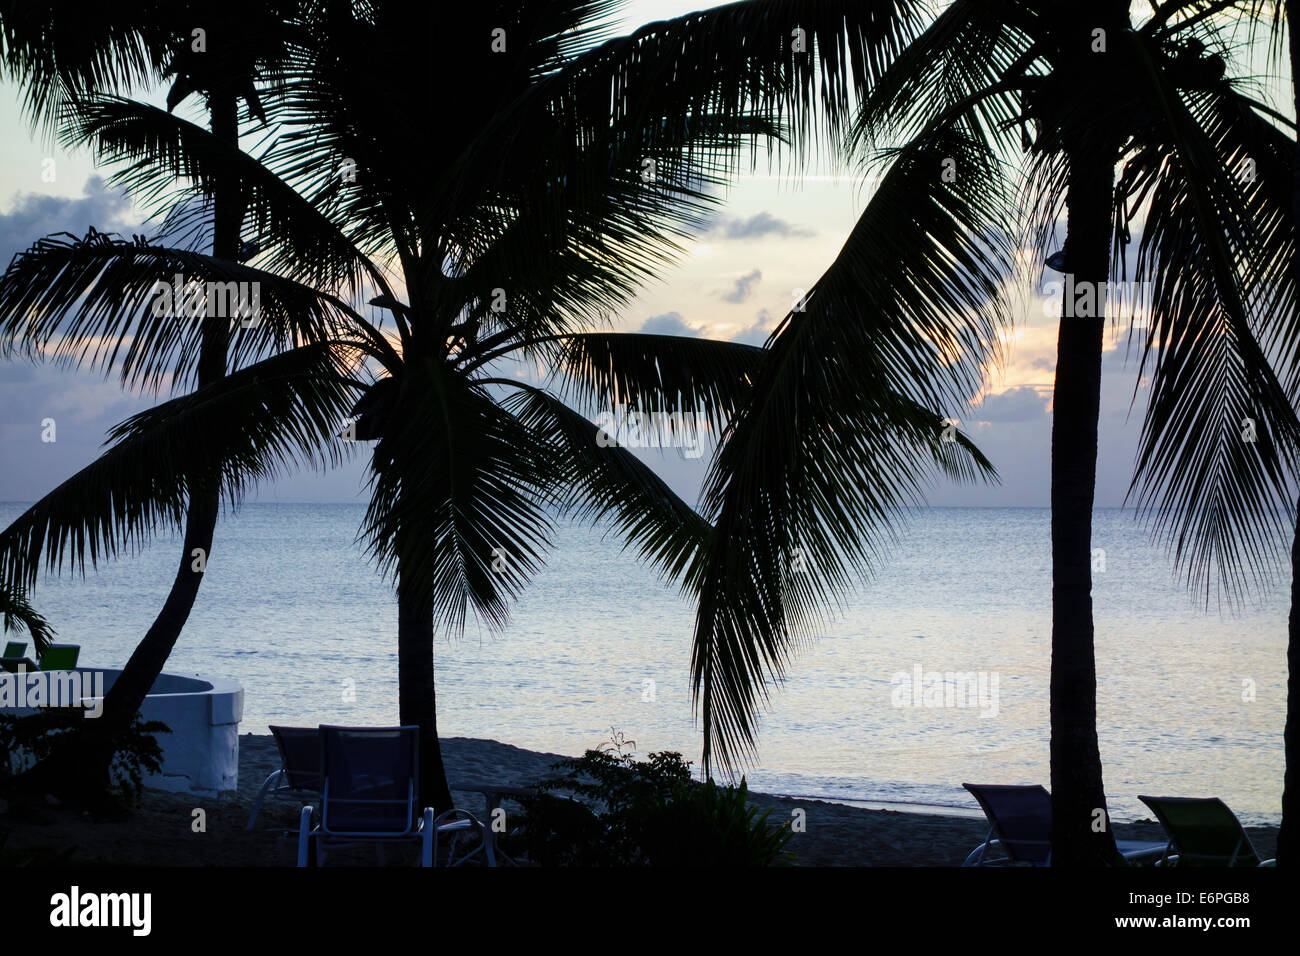 Coconut palms, Cocos nucifera, silhouetted against the Caribbean sea at dusk. Stock Photo